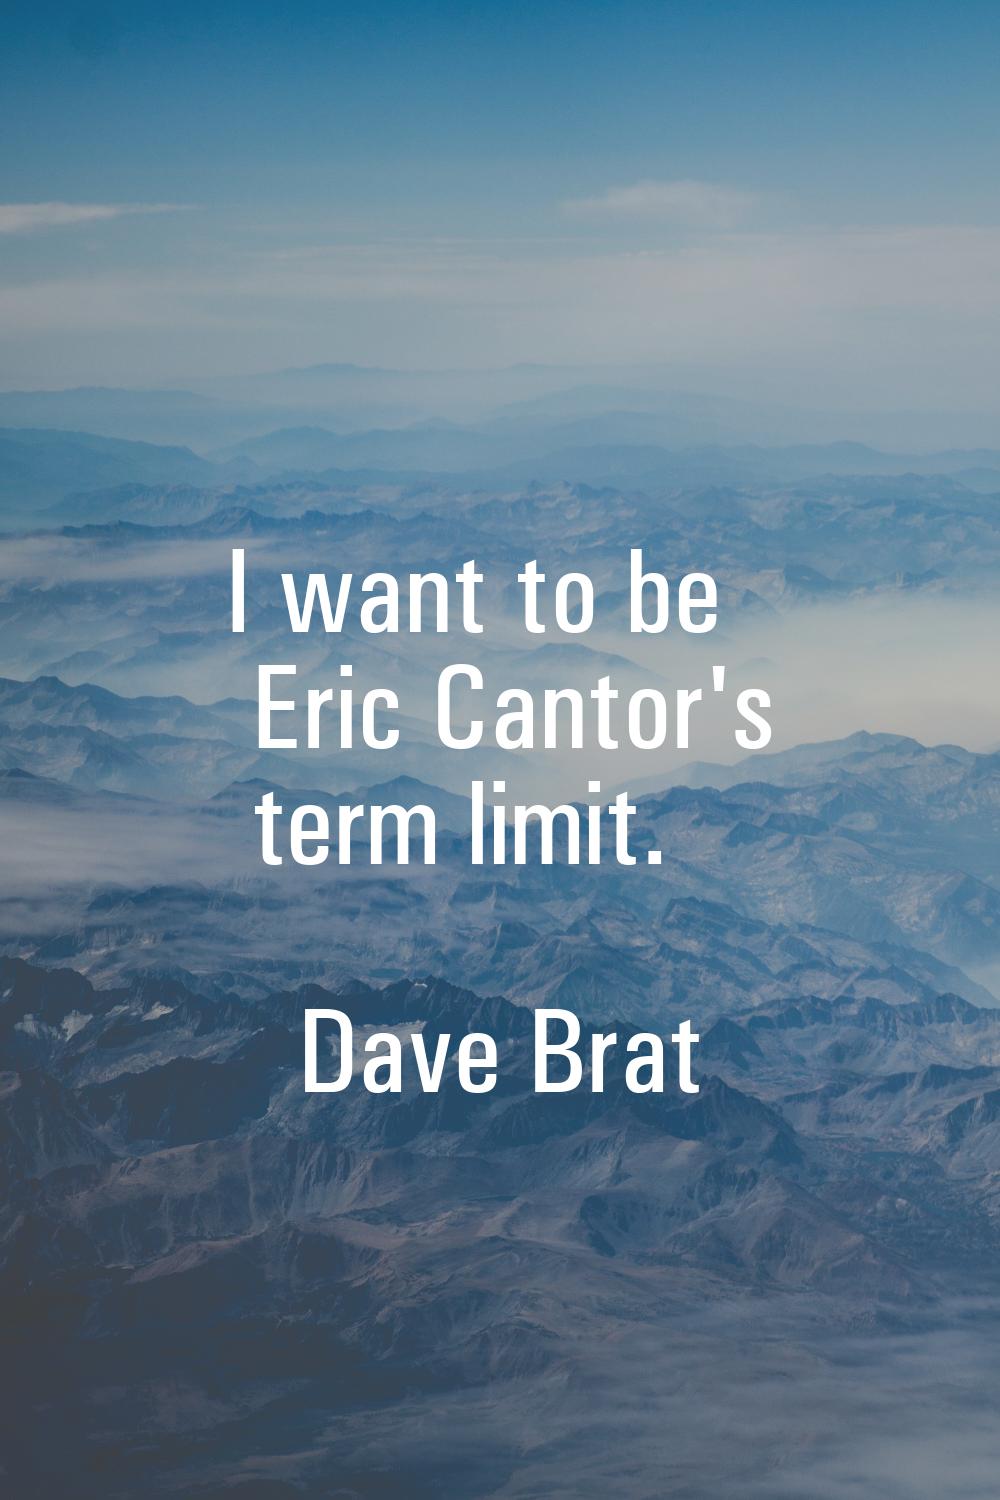 I want to be Eric Cantor's term limit.